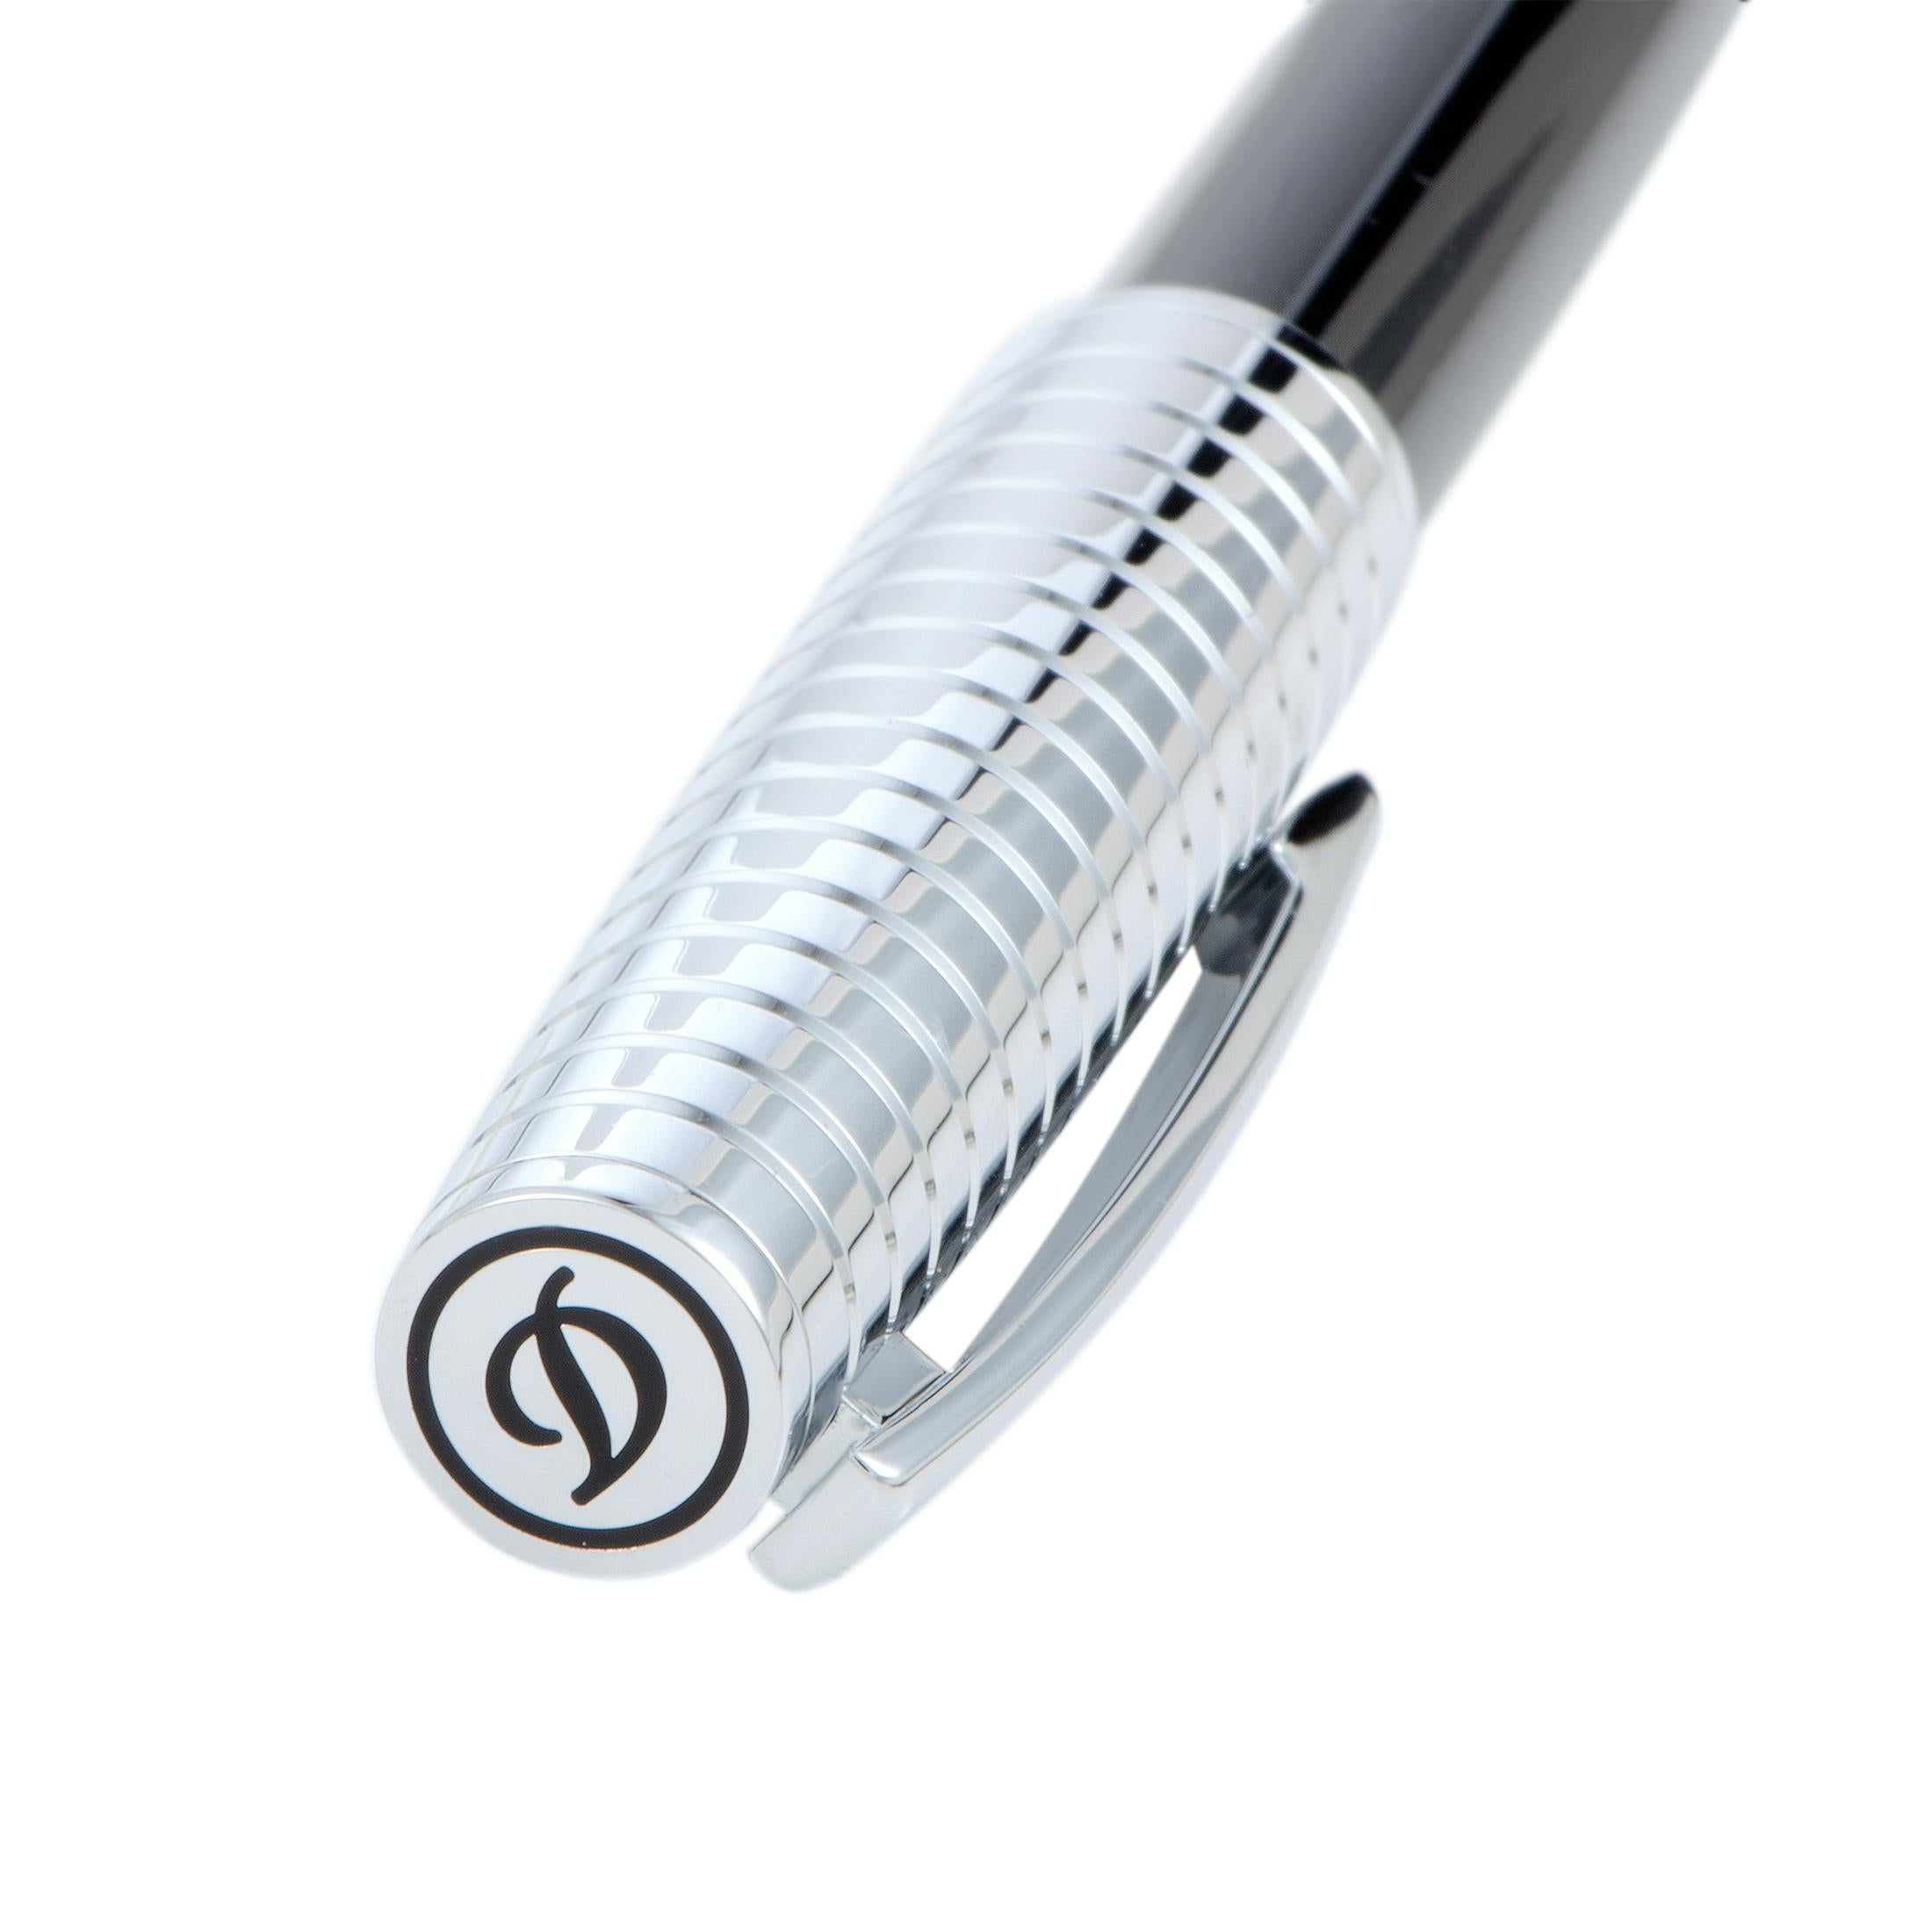 Featuring a compellingly elegant combination of striking black and enticing chrome, this exquisite pen presents an exceptional choice if you are looking for an accessory that is both incredibly stylish and splendidly understated. The pen is designed